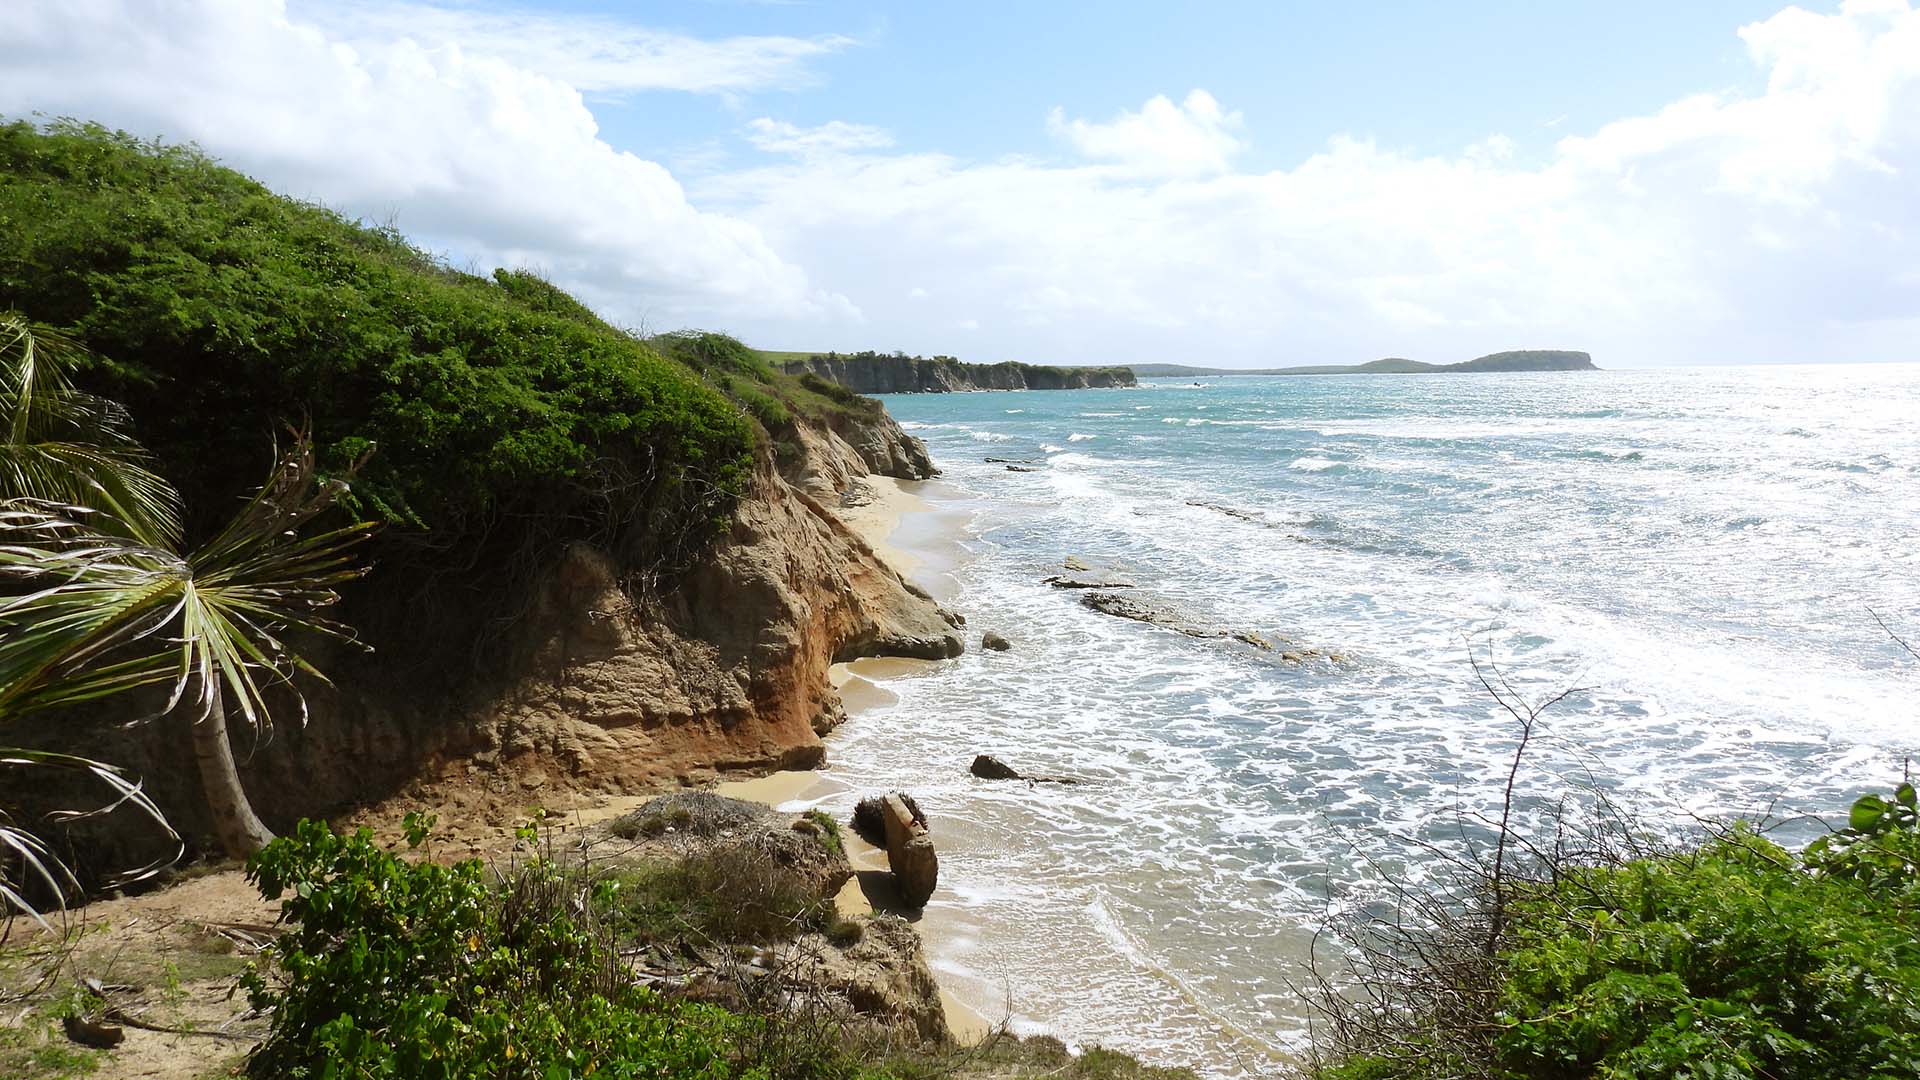 Beach and cliffs in Vieques, Puerto Rico, on a sunny day.